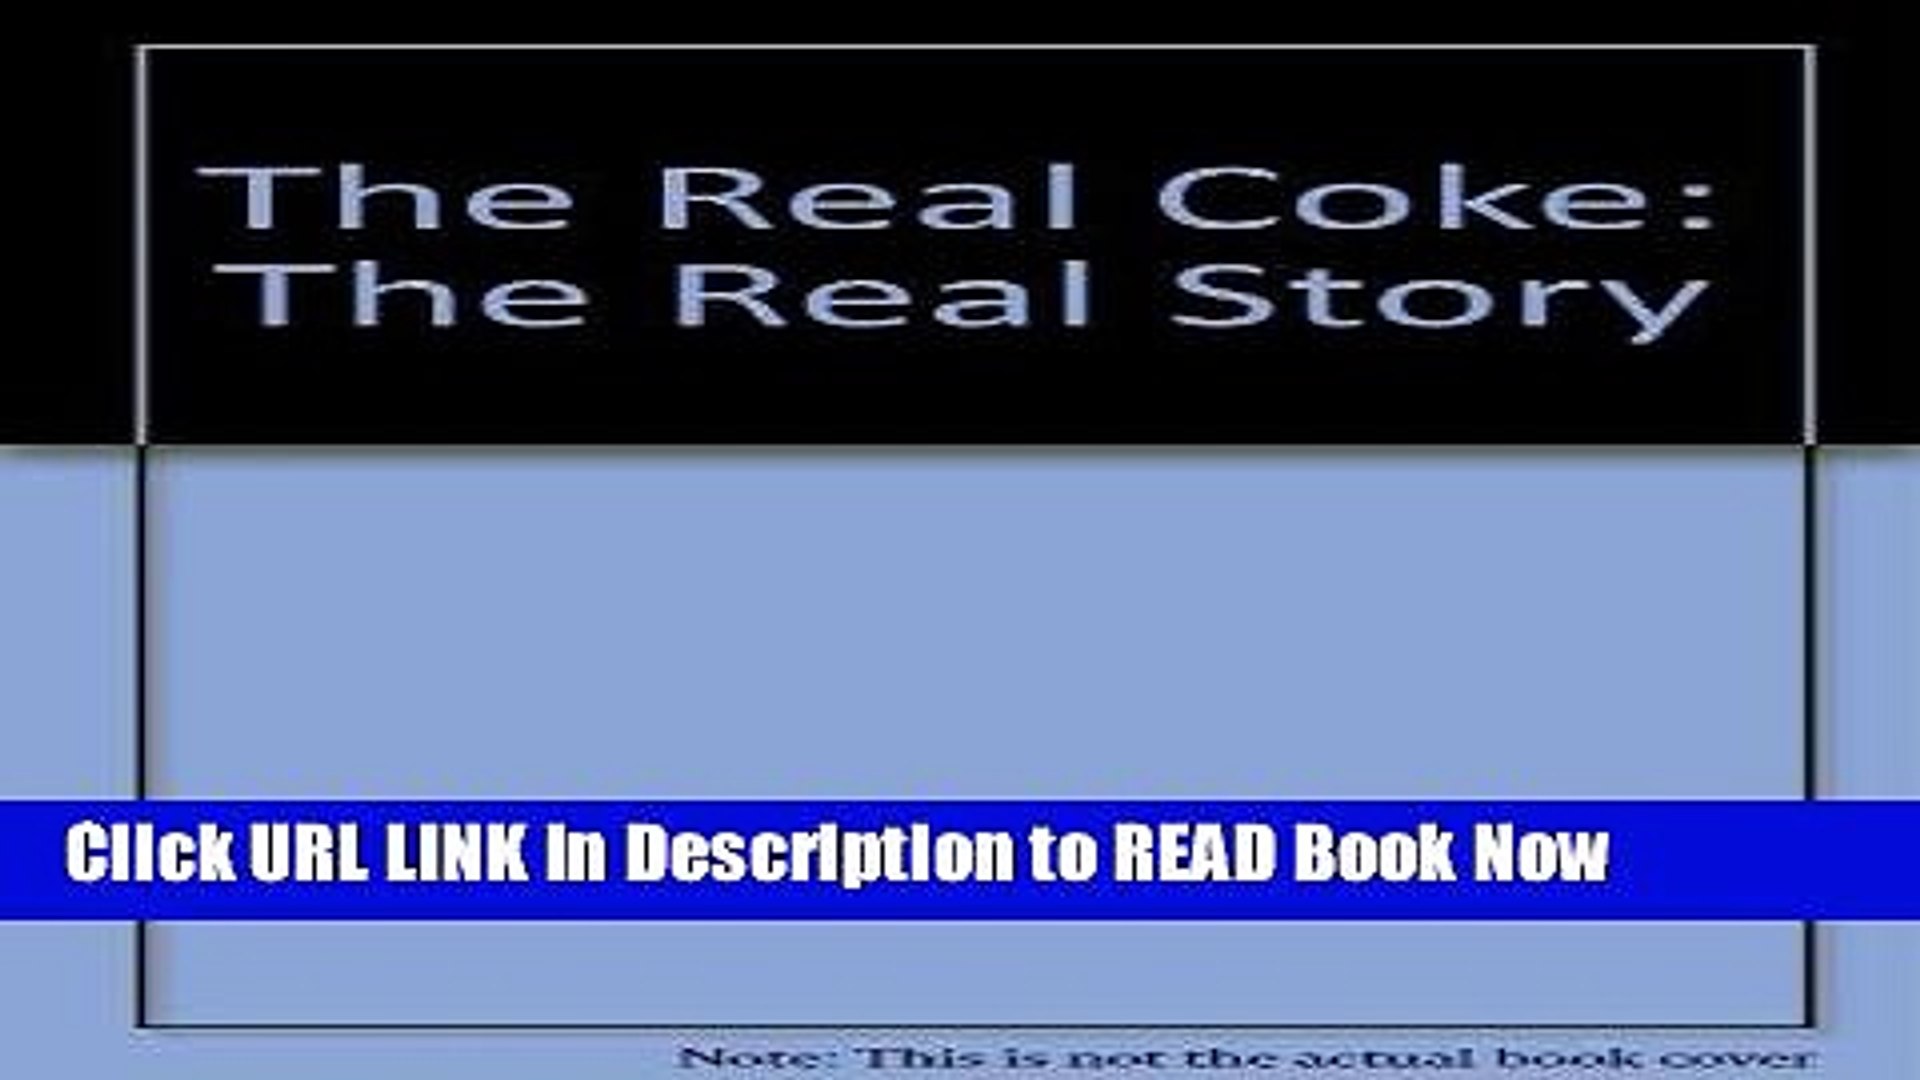 [Best] THE REAL COKE: THE REAL STORY Online Books